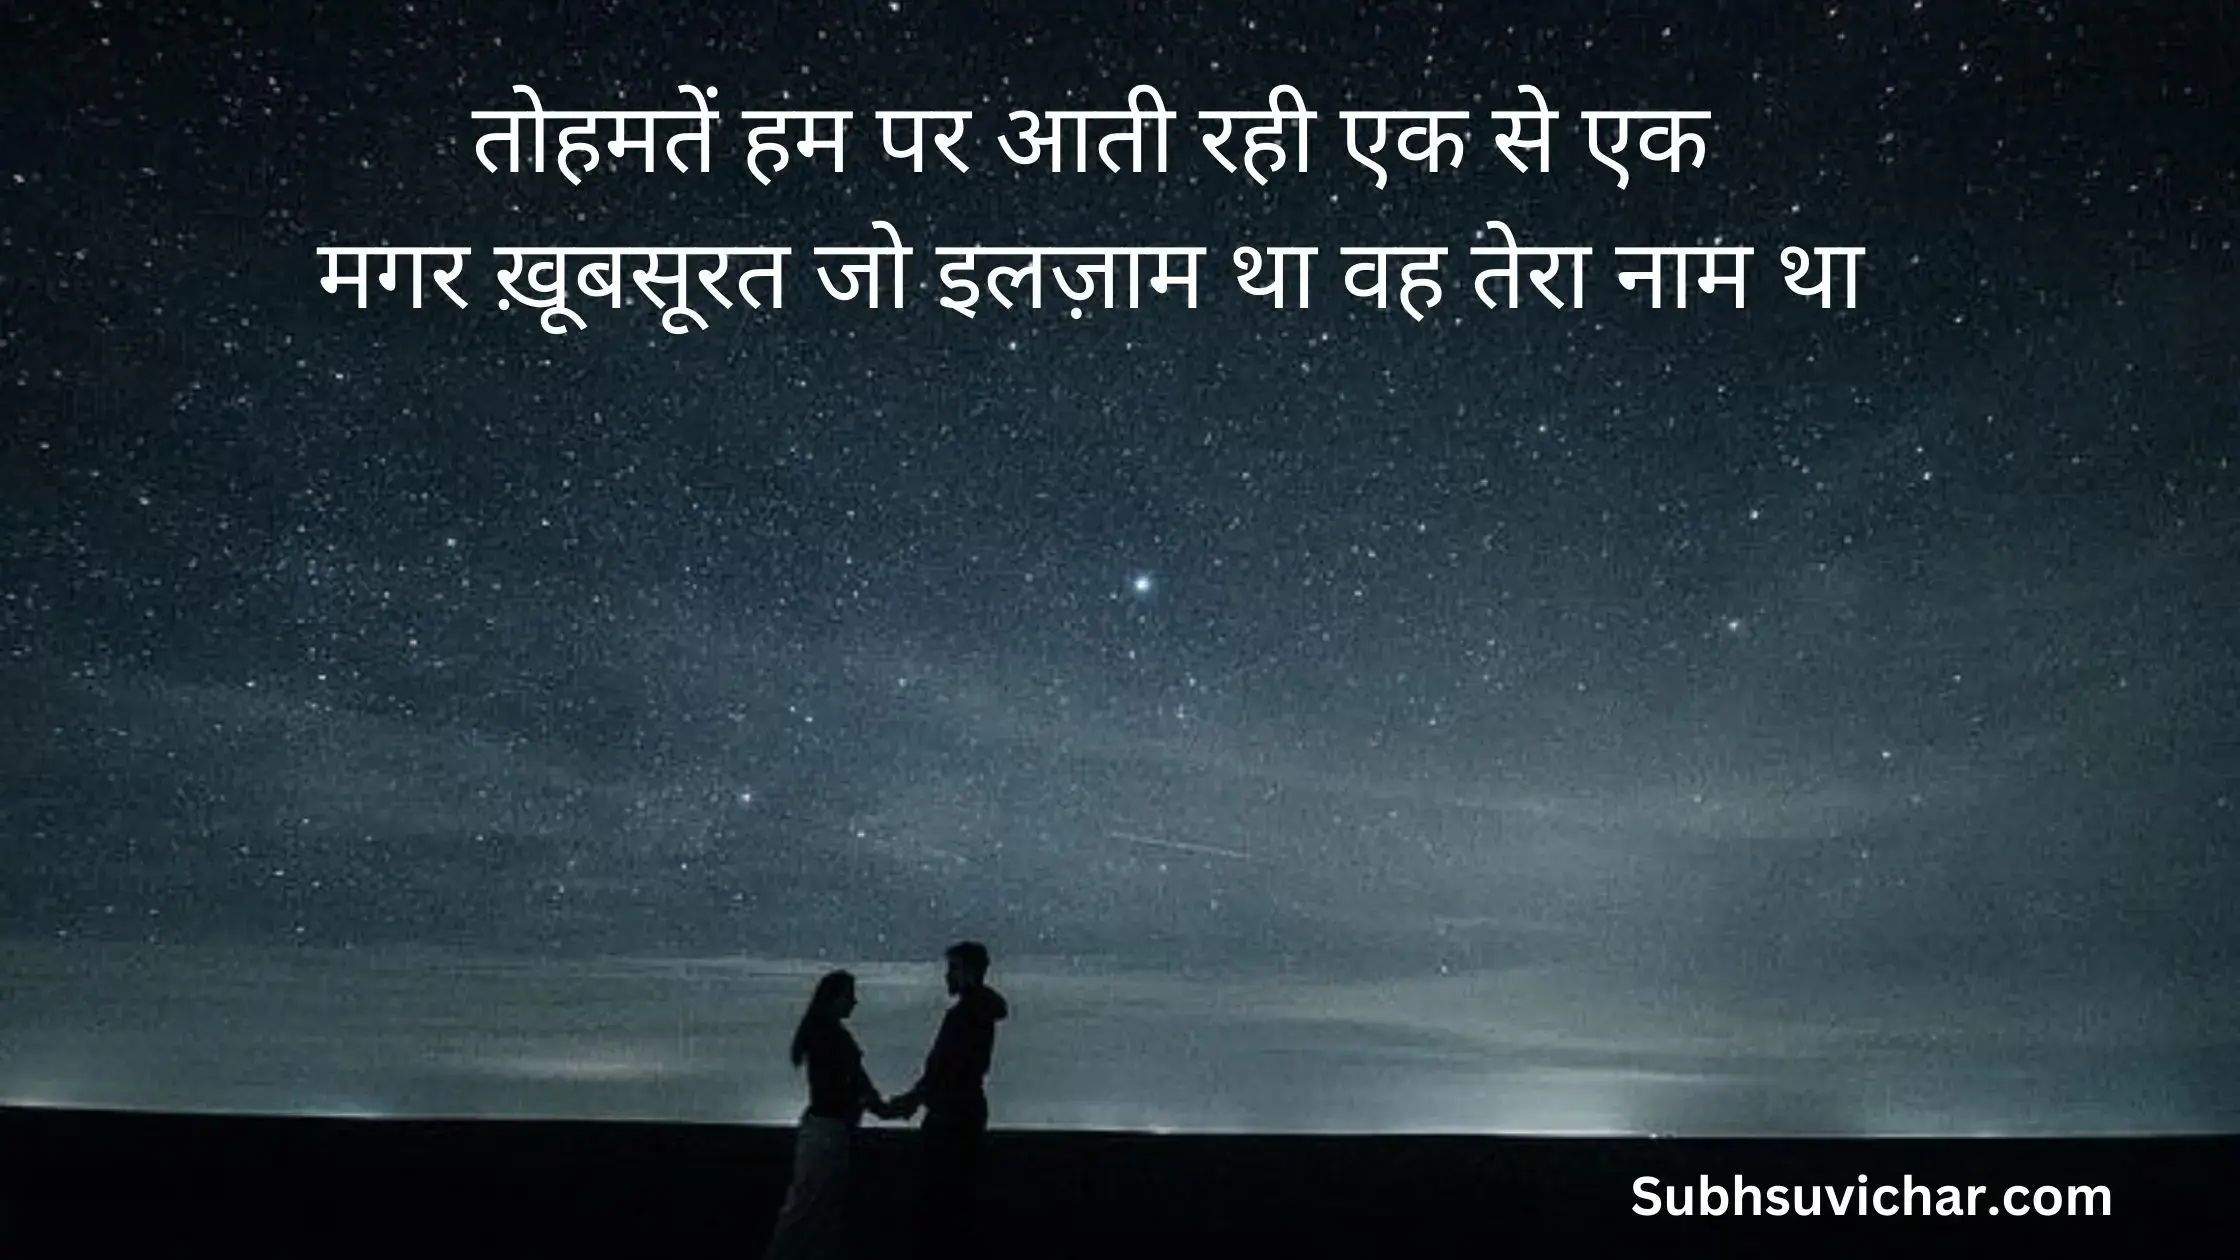 This post contains huge collection of breakup sad shayari in hindi font with high quality images for your whatsaap and facebook status.